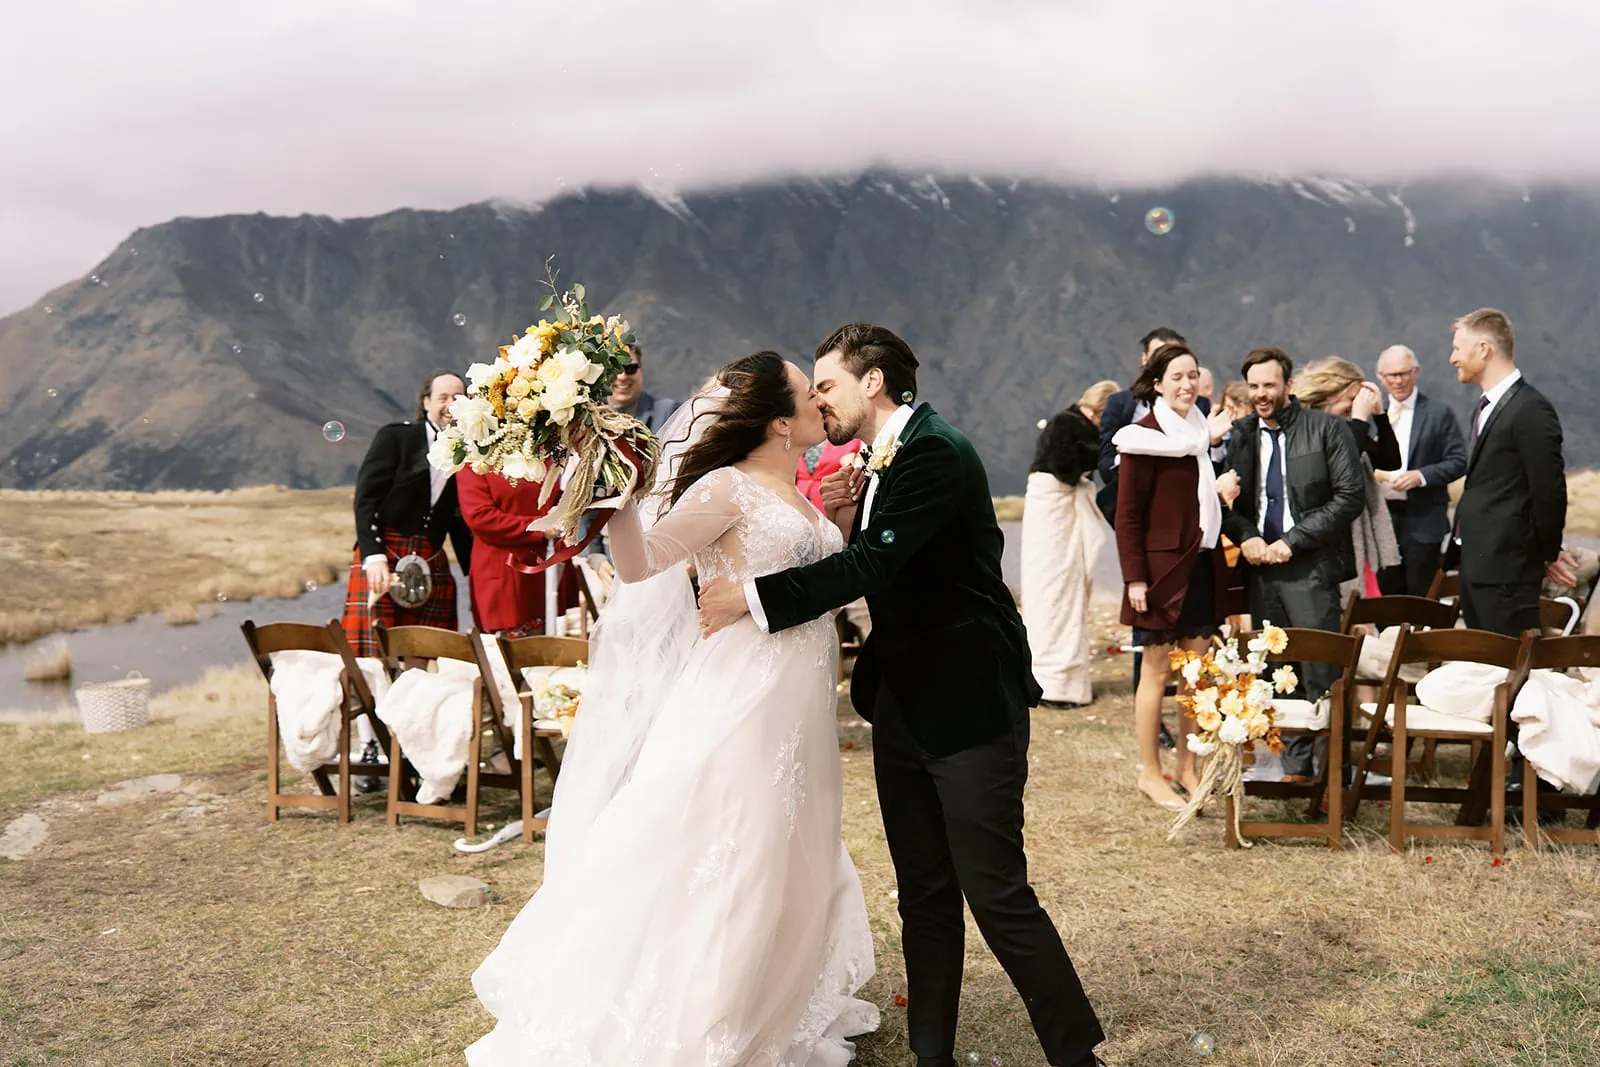 Queenstown Wedding Photographer Nat & Tim's Queenstown elopement wedding captured their heartfelt moment of a bride and groom kissing in front of the breathtaking mountains at Deer Park Heights.